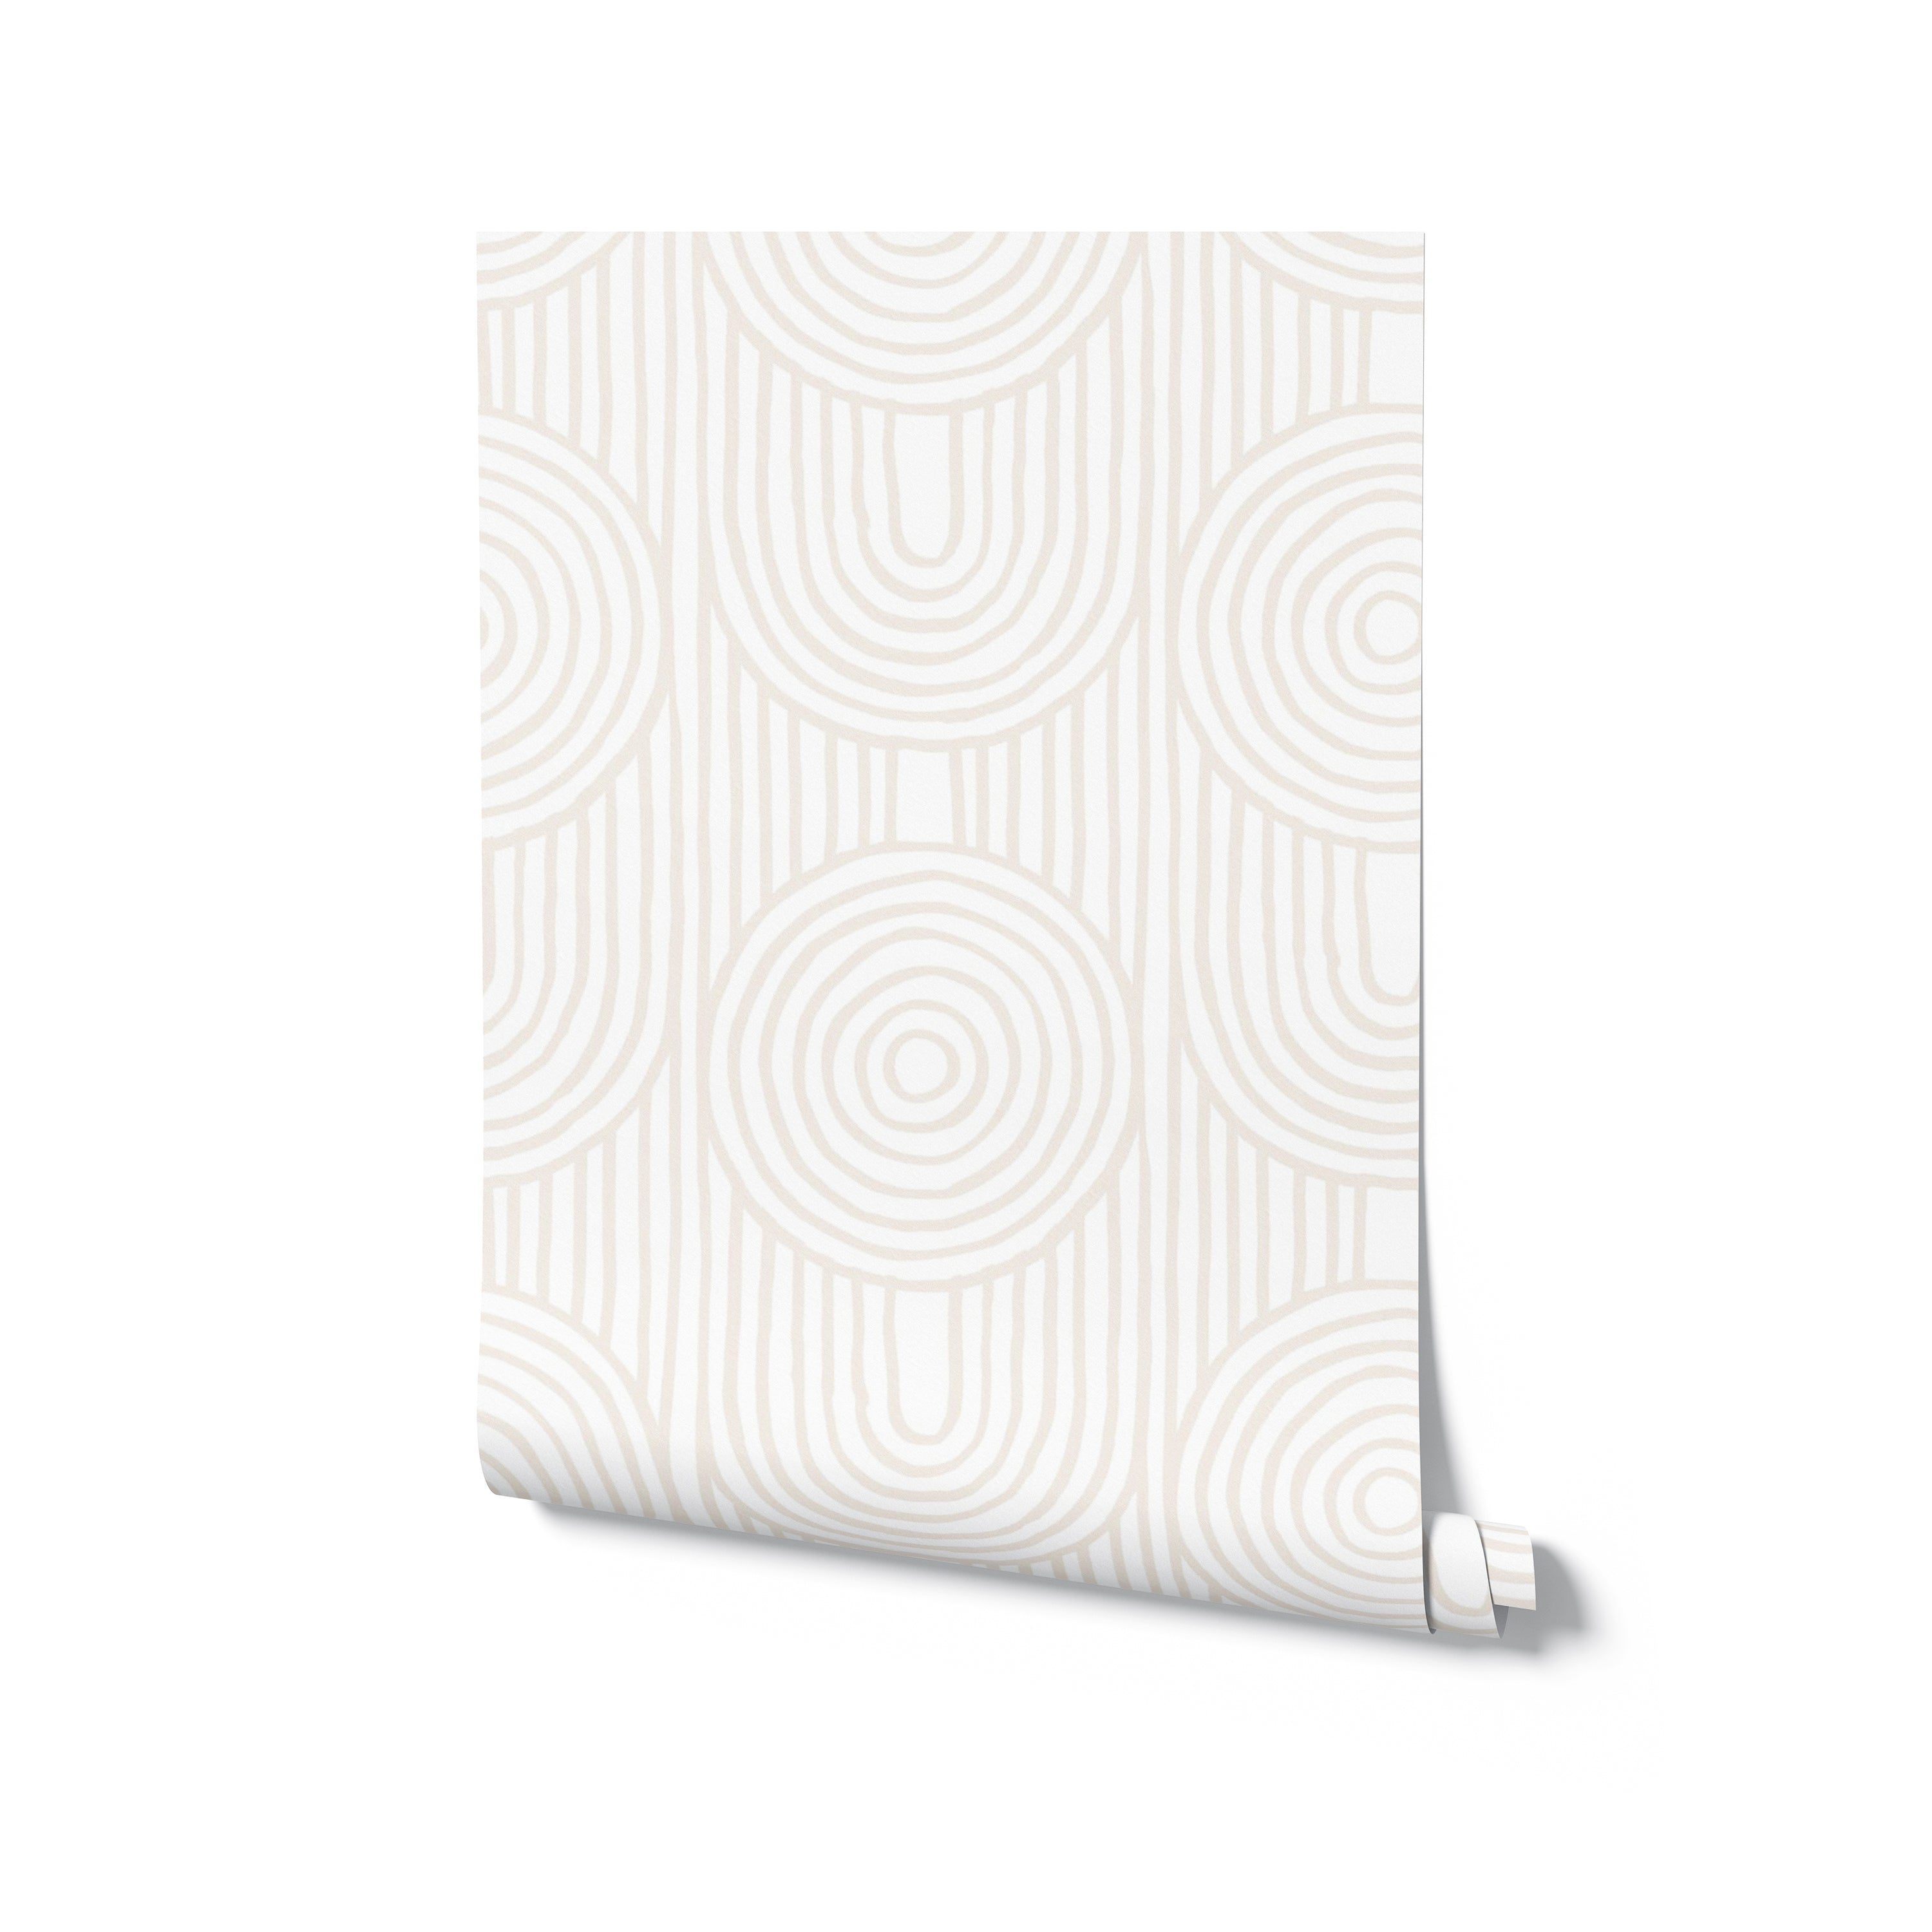 A roll of Zen Abstract Wallpaper, elegantly unrolled at one corner to reveal its calming pattern of beige concentric circles on a white background, representing a sophisticated choice for adding a peaceful ambiance to any room